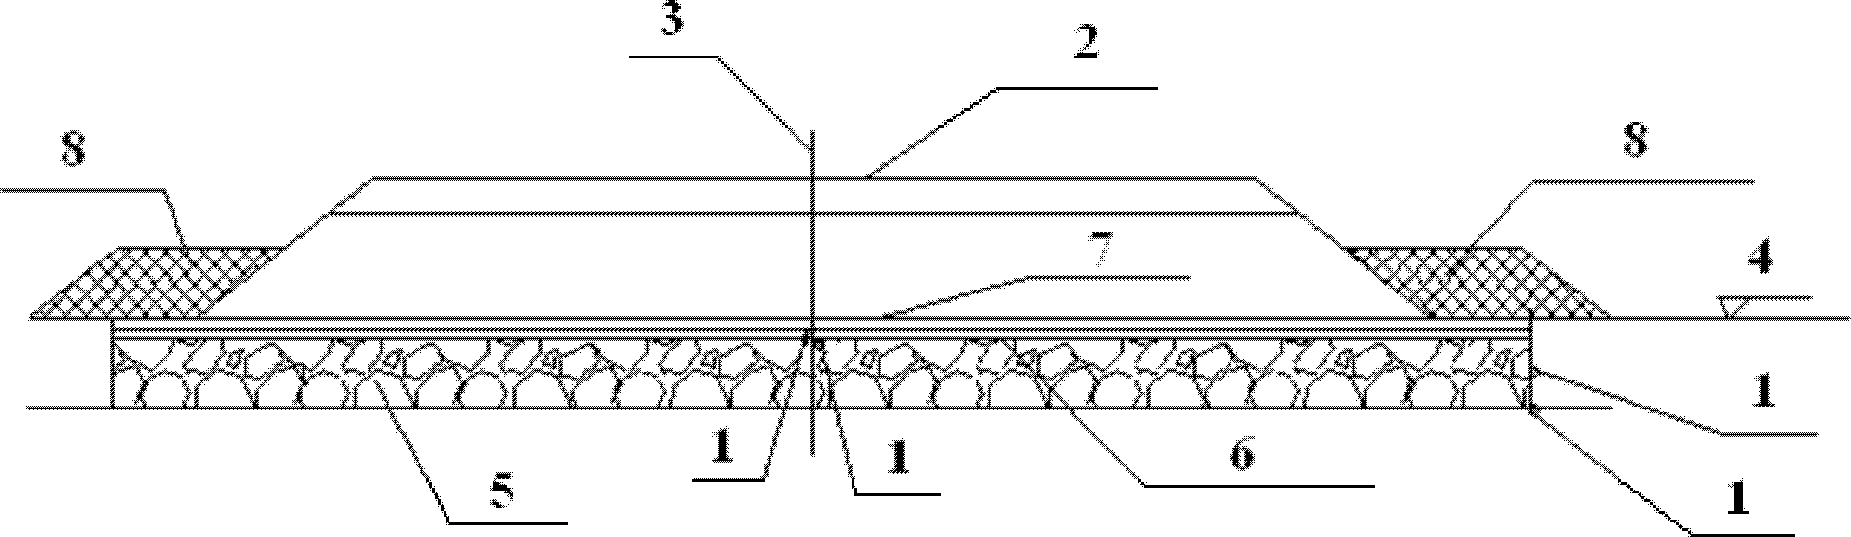 Insulation construction method for frozen-earth roadbed